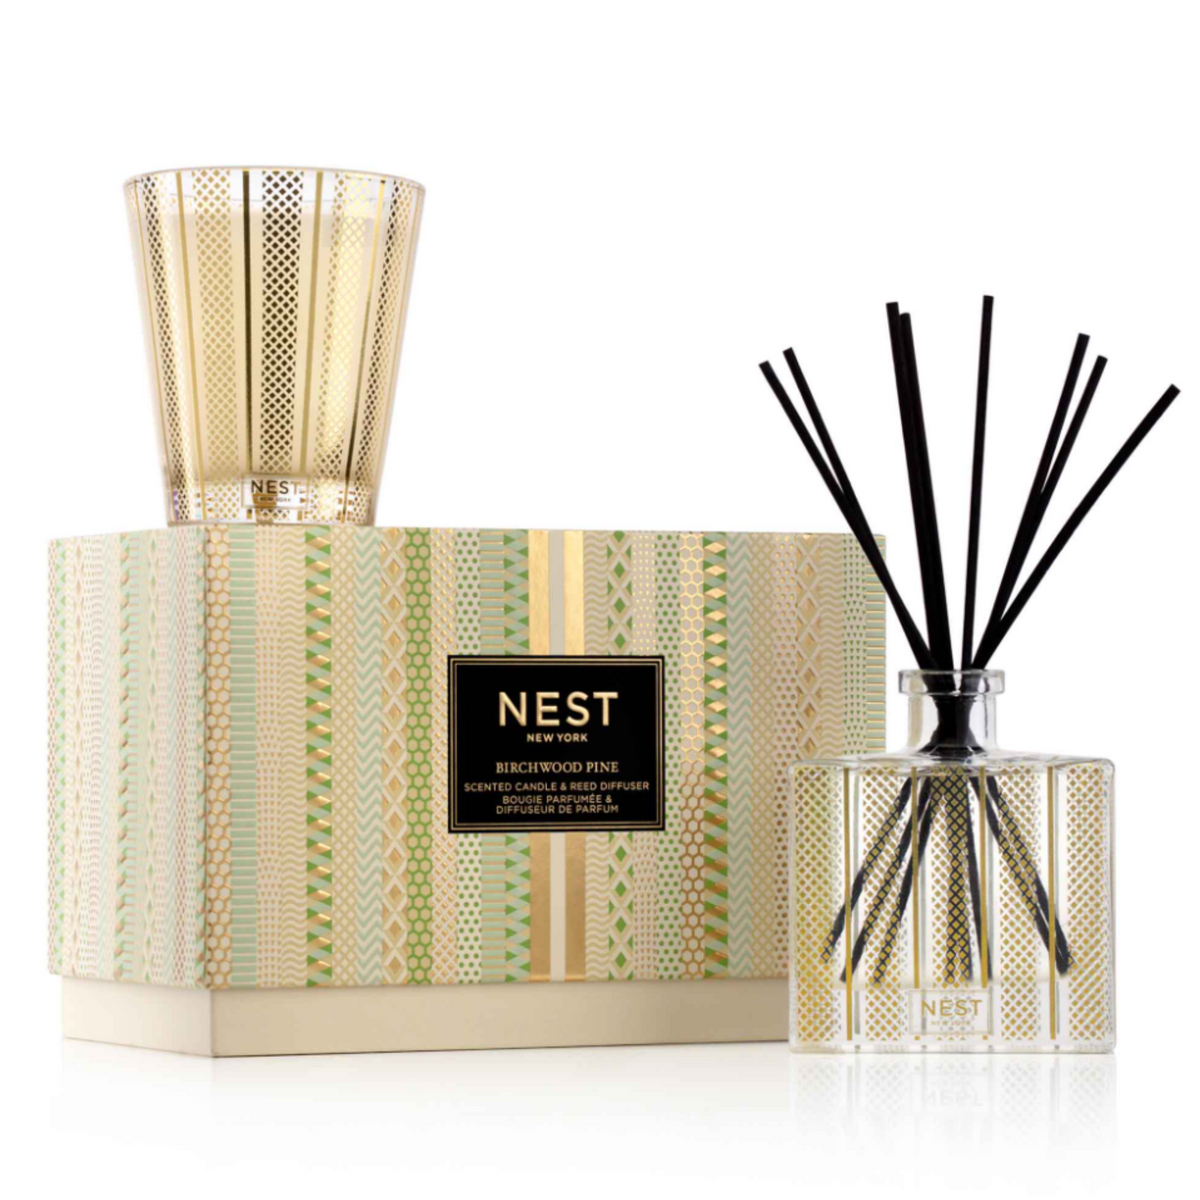 Primary image of Birchwood Pine Candle & Diffuser Set